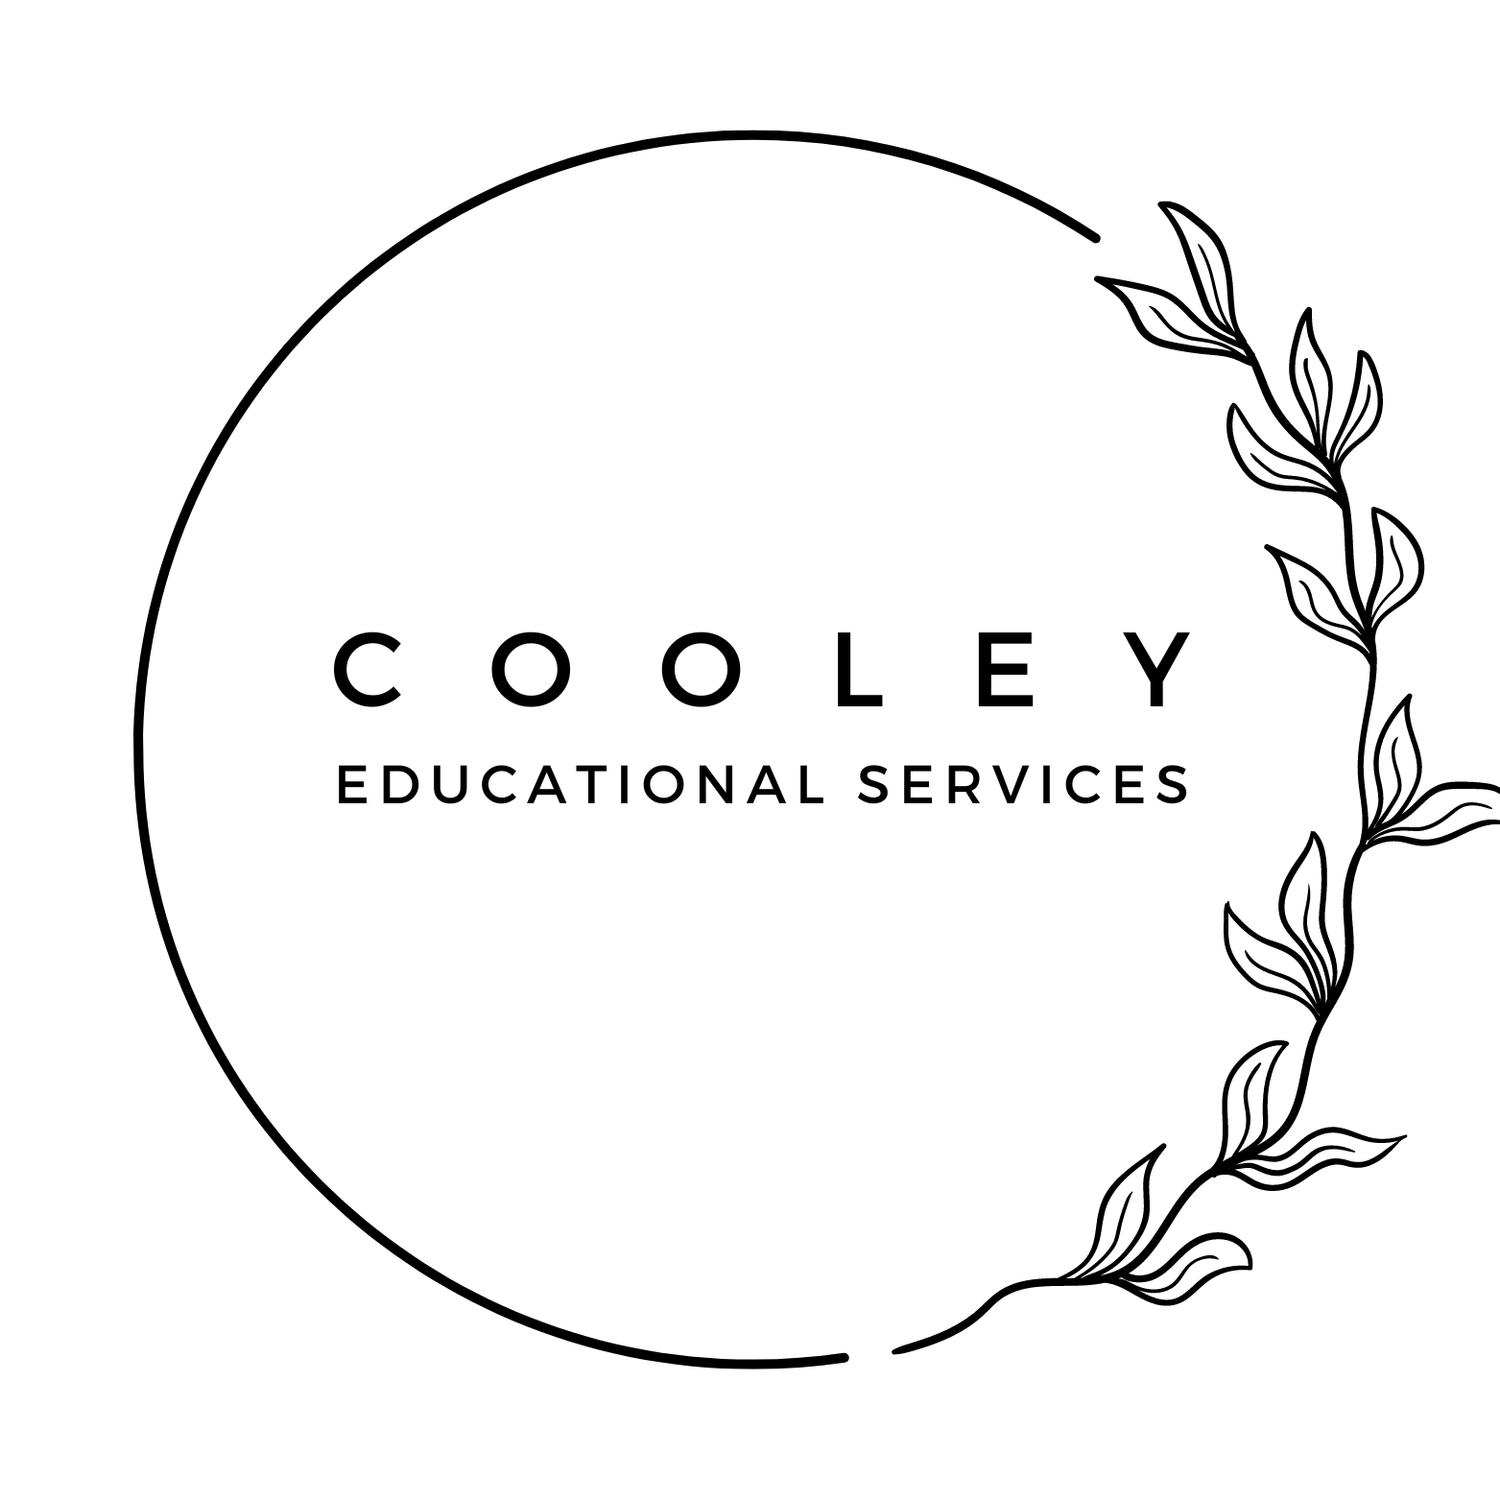 Cooley Educational Services